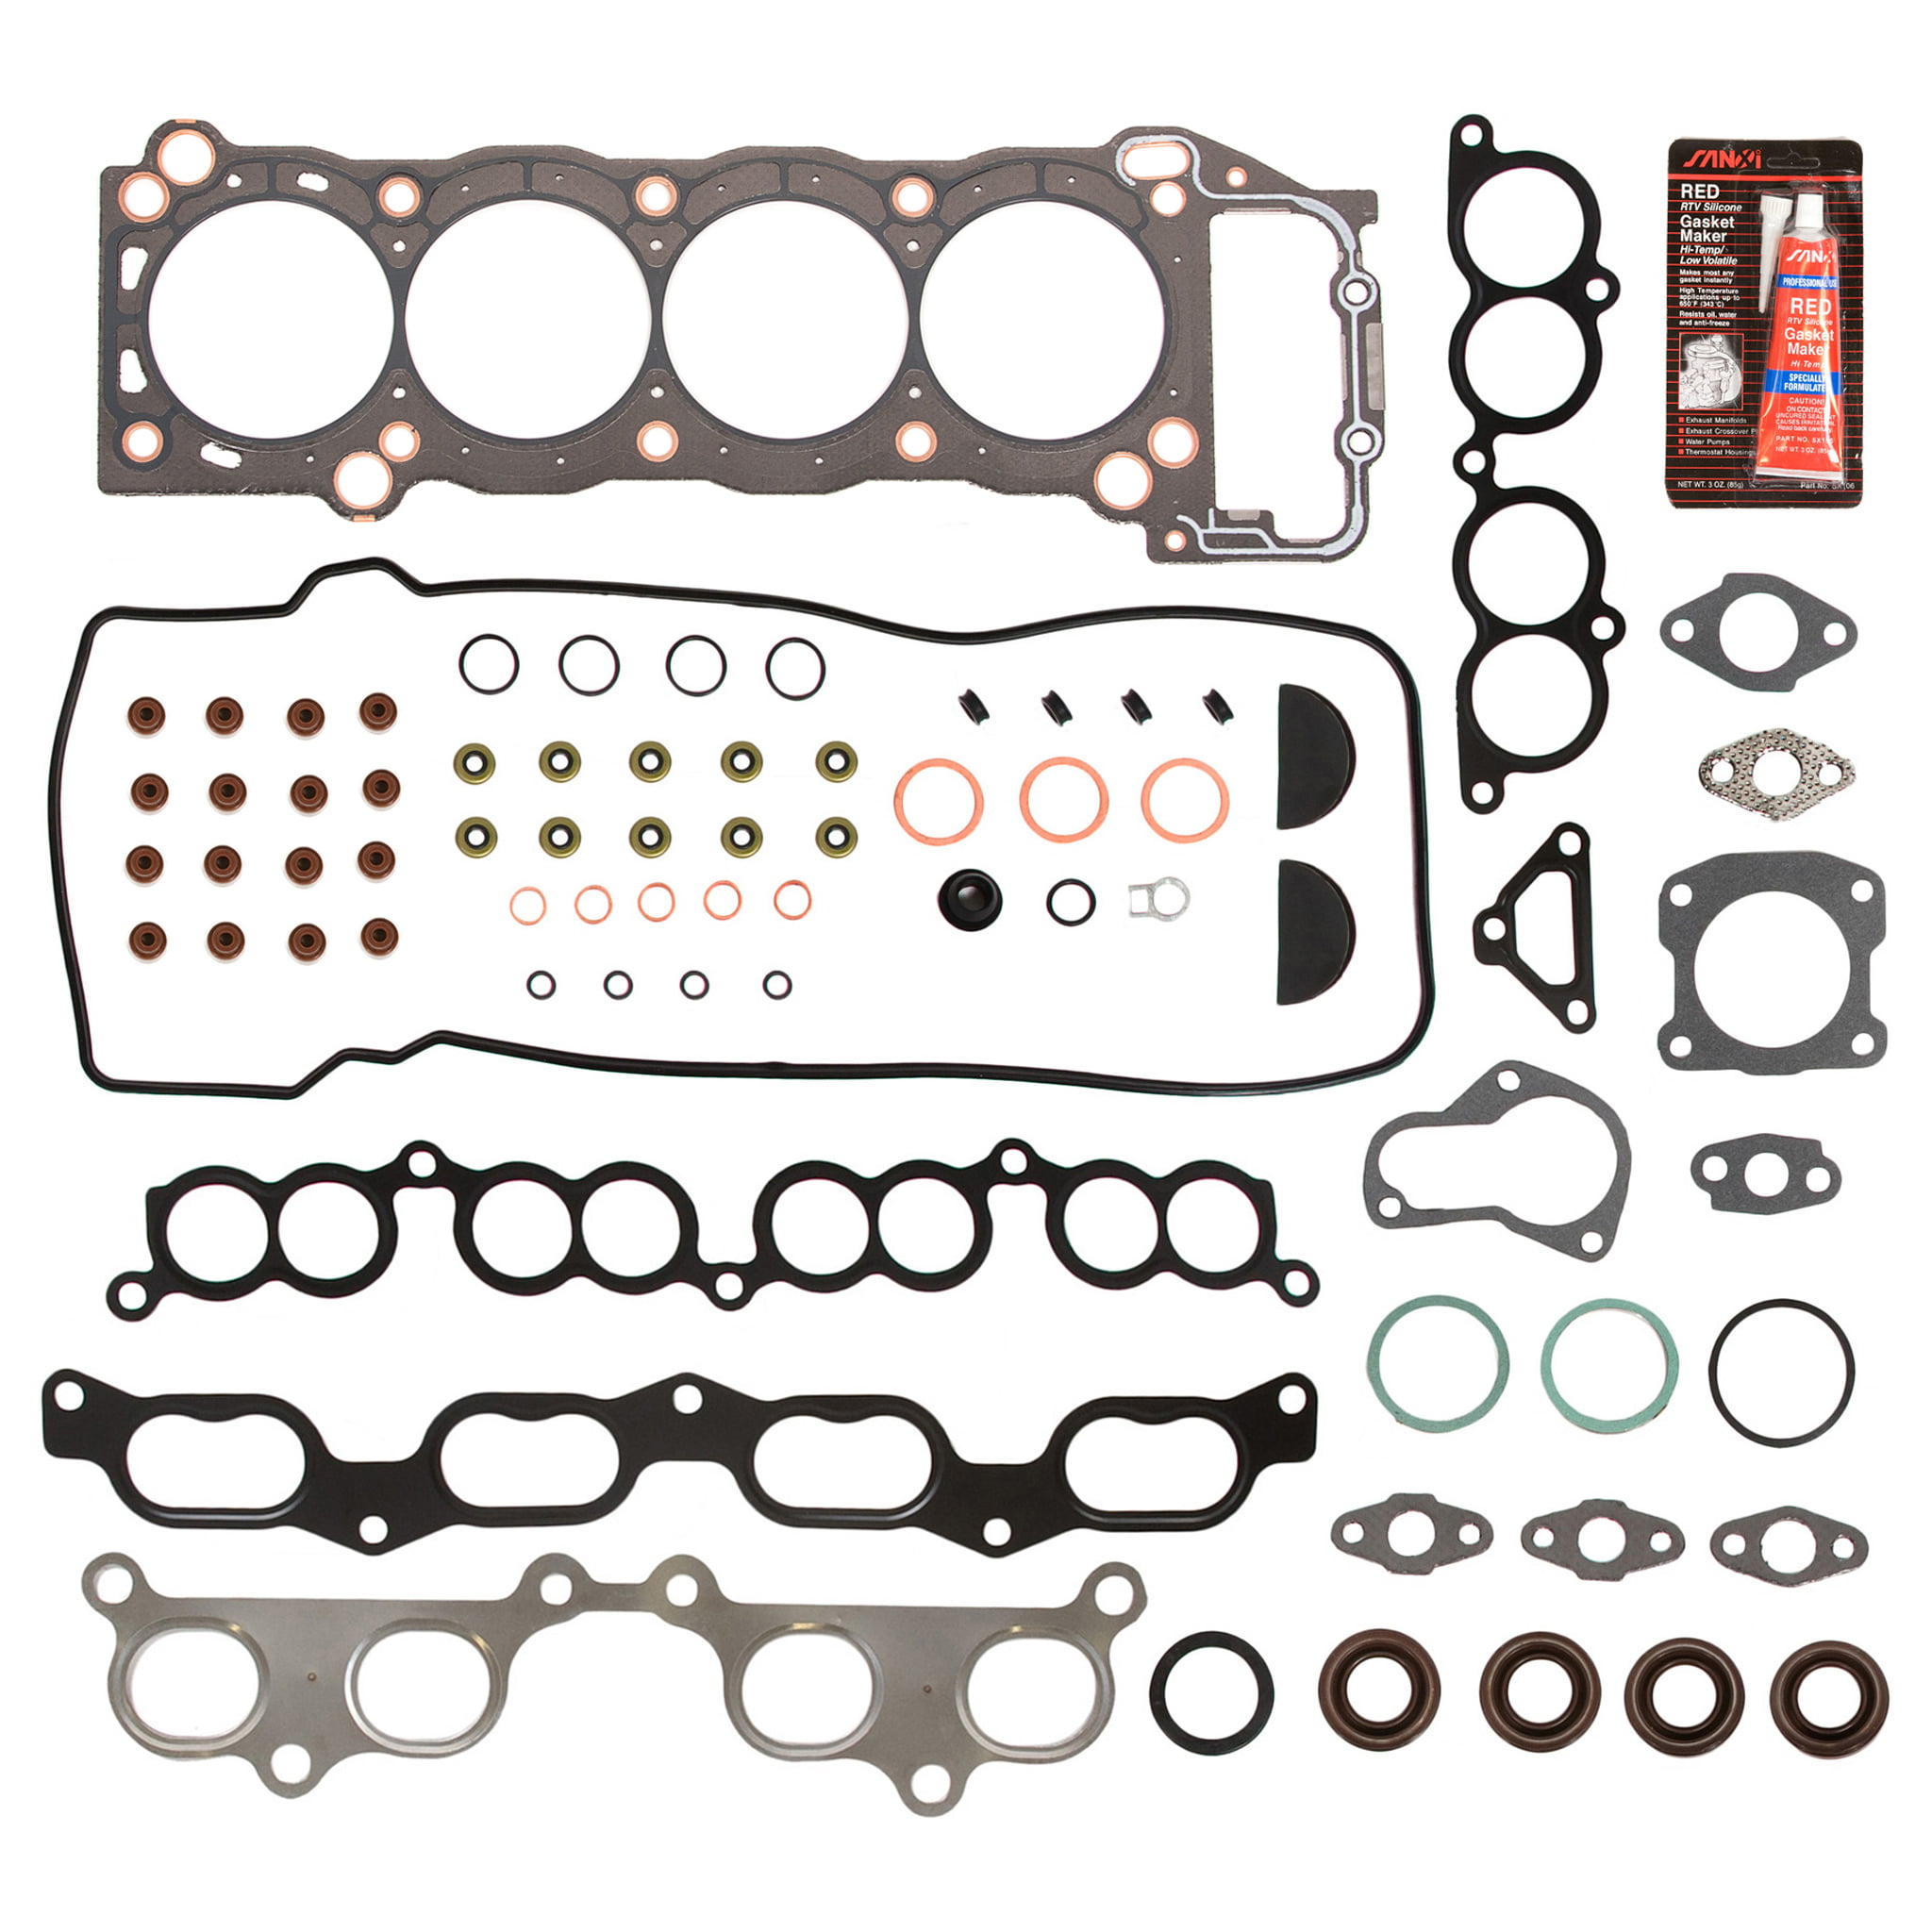 Full Head Gasket Set Fit for Toyota Tacoma 4Runner T100 2.7 DOHC 3RZFE 94-04